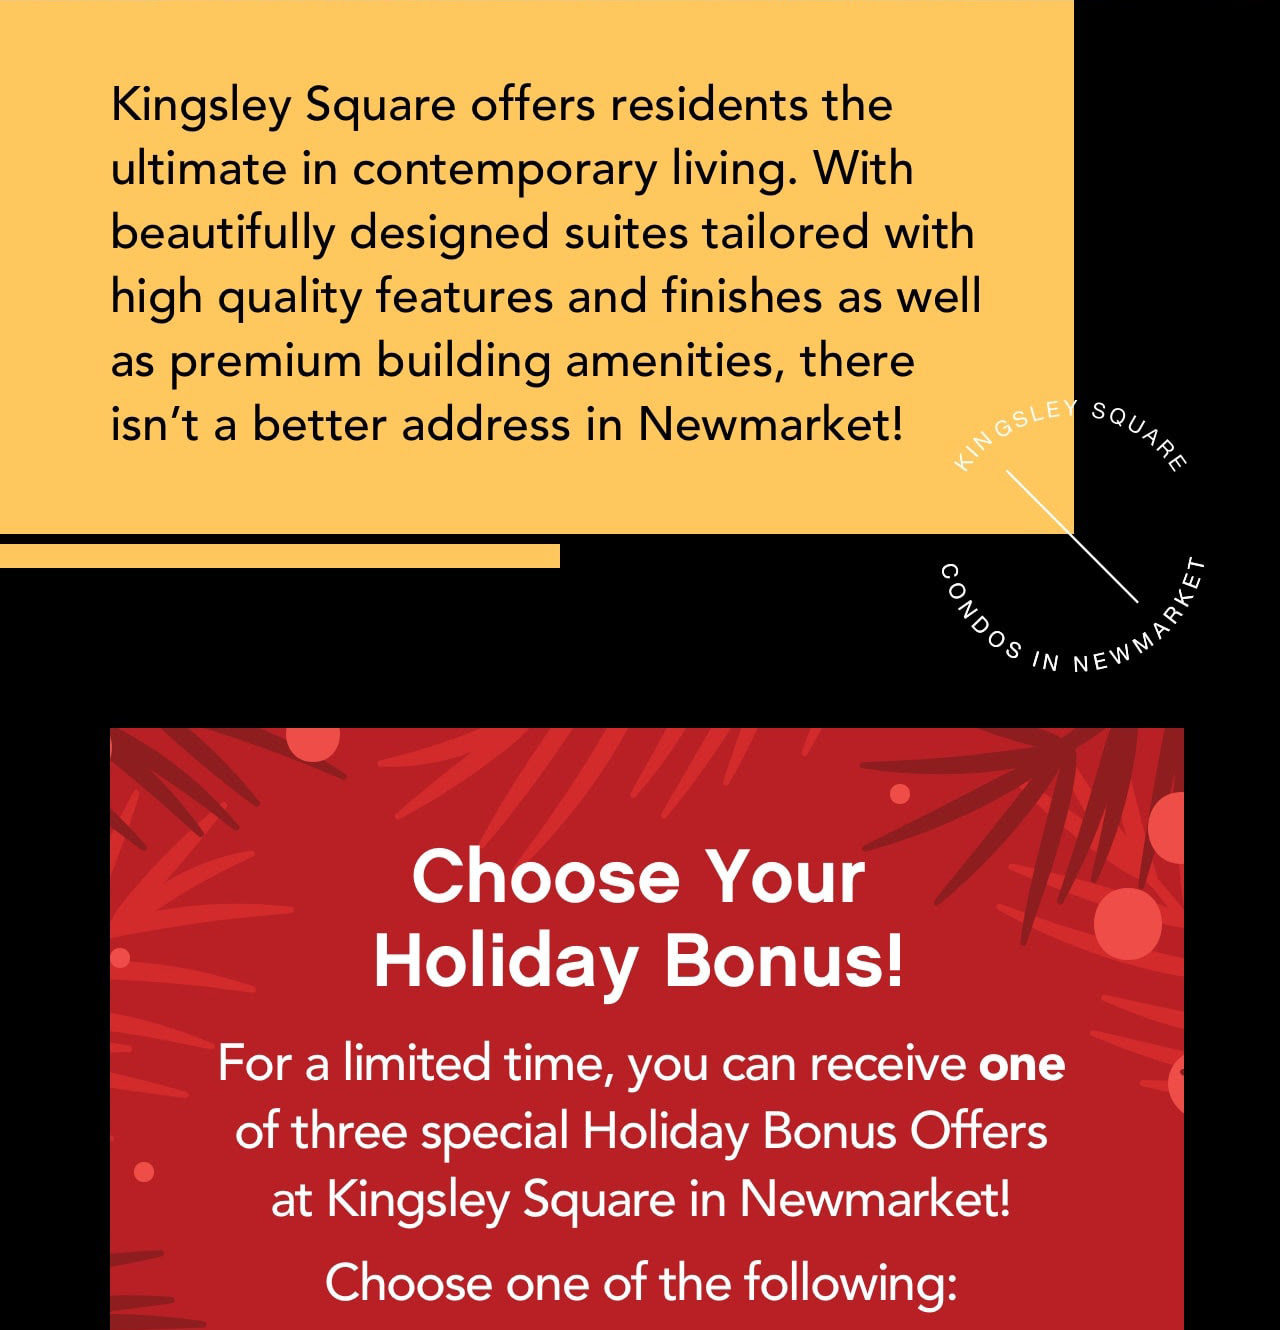 Kingsley Square offers residents the ultimate in contemporary living. With beautifully designed suites tailored with high quality features and finishes as well as premium building amenities, there isn't a netter address in Newmarket!